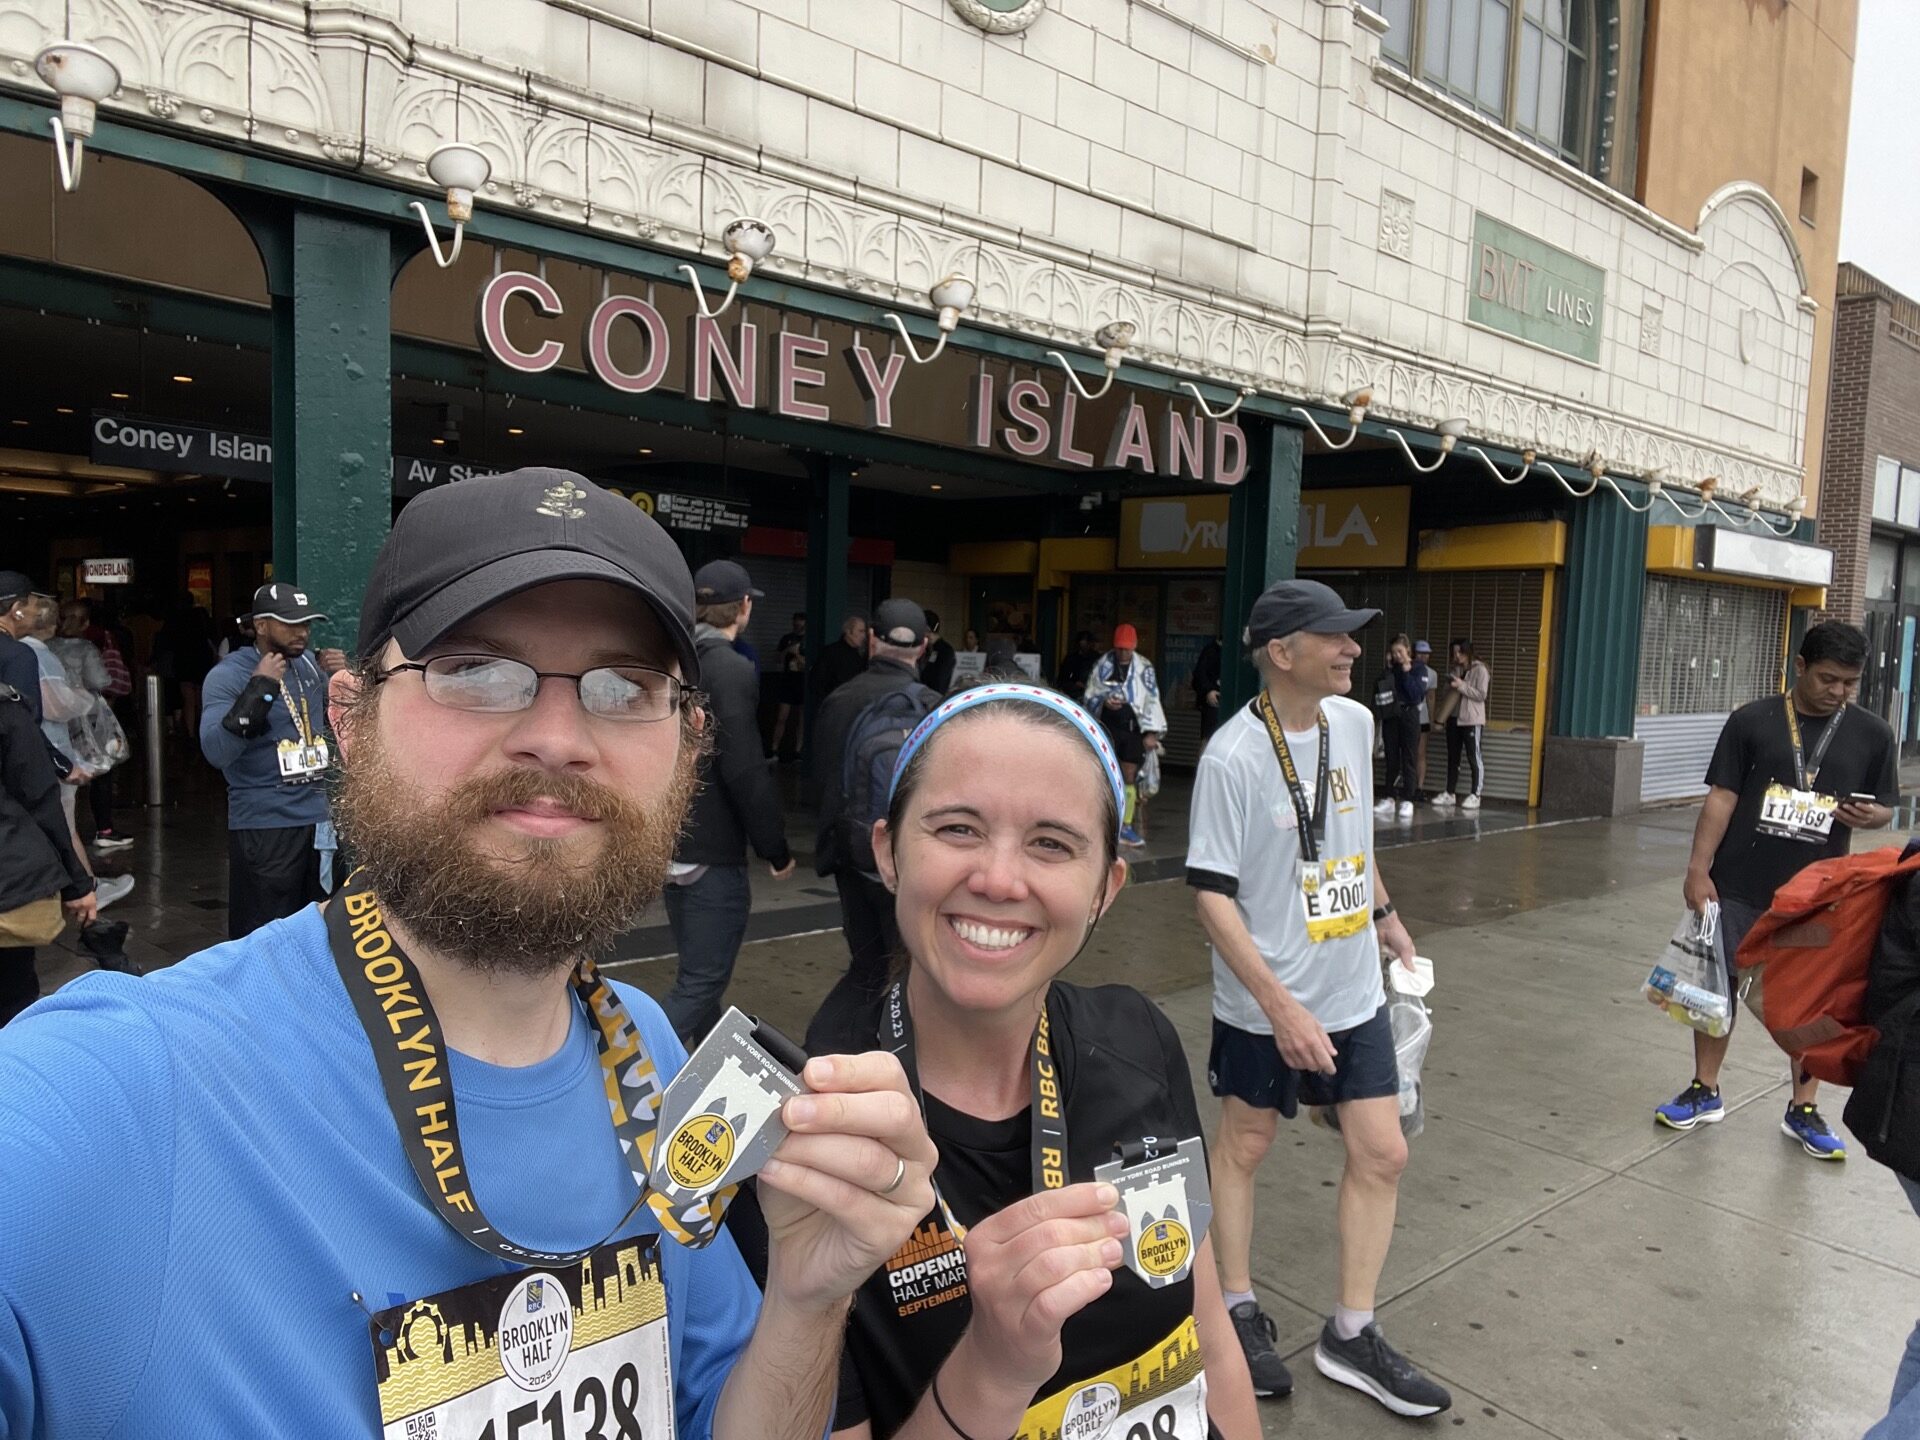 Tips for Completing the NYRR Virtual 6 (Brooklyn Half Entry) [2024]